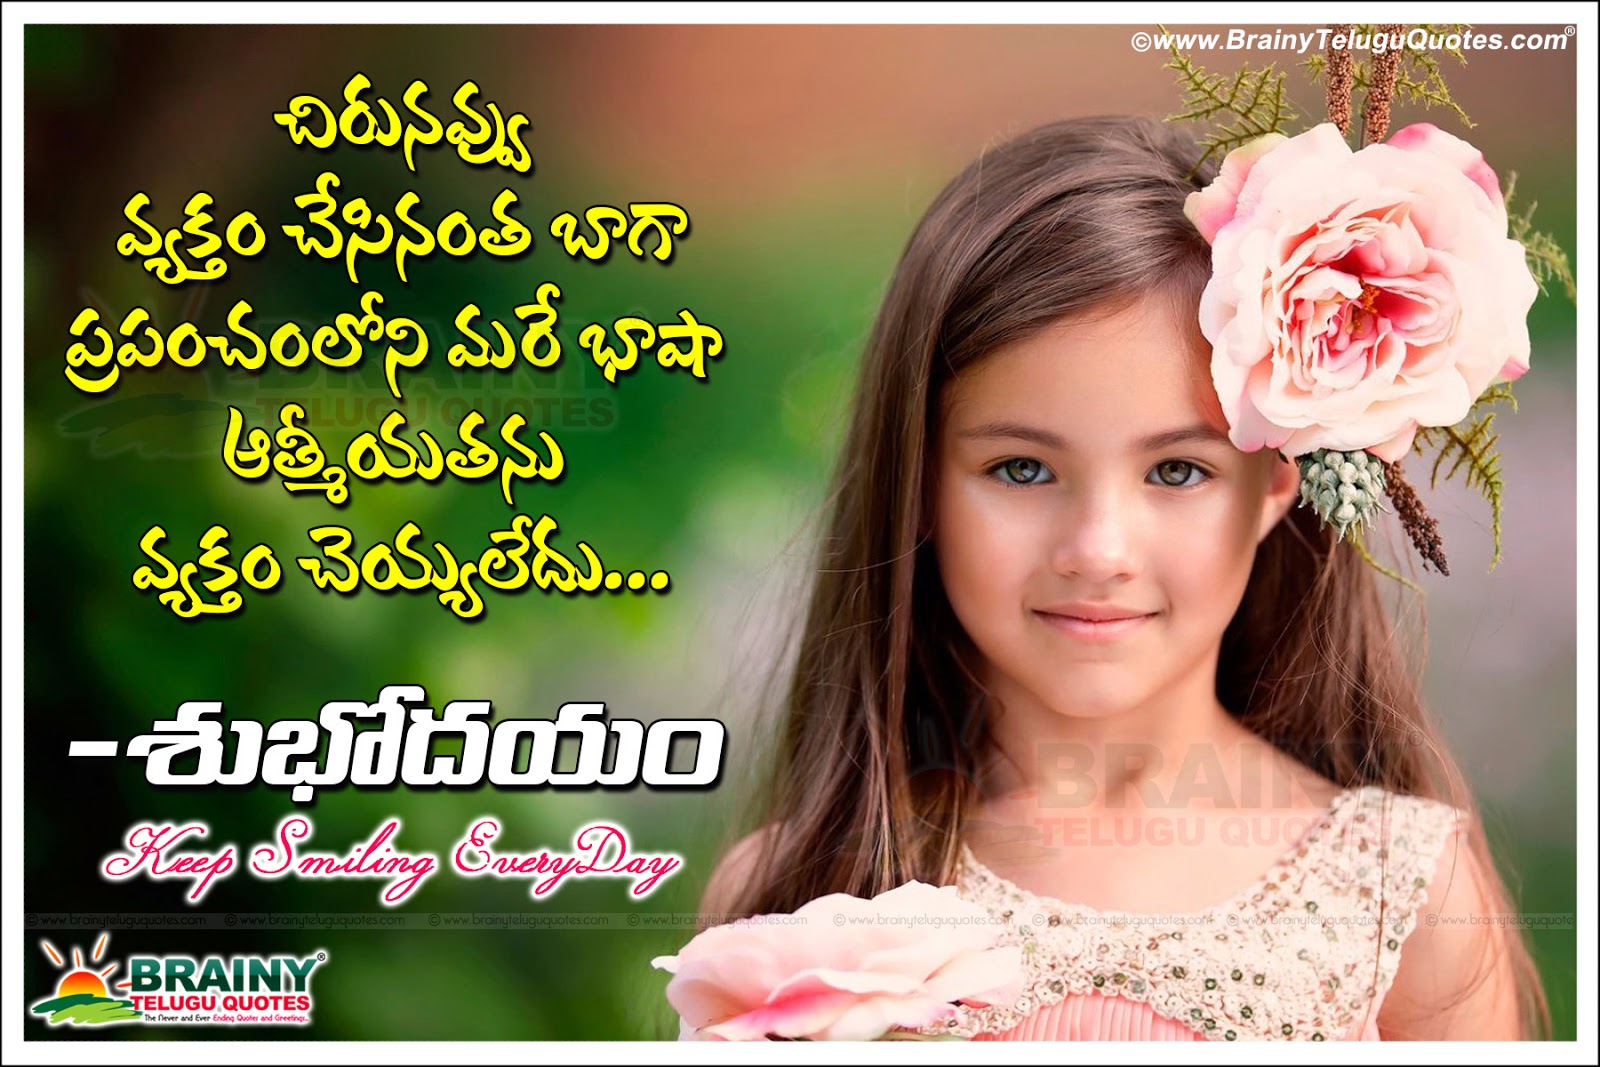 Telugu Good Morning Greetings with Secret of Life success with smile ...